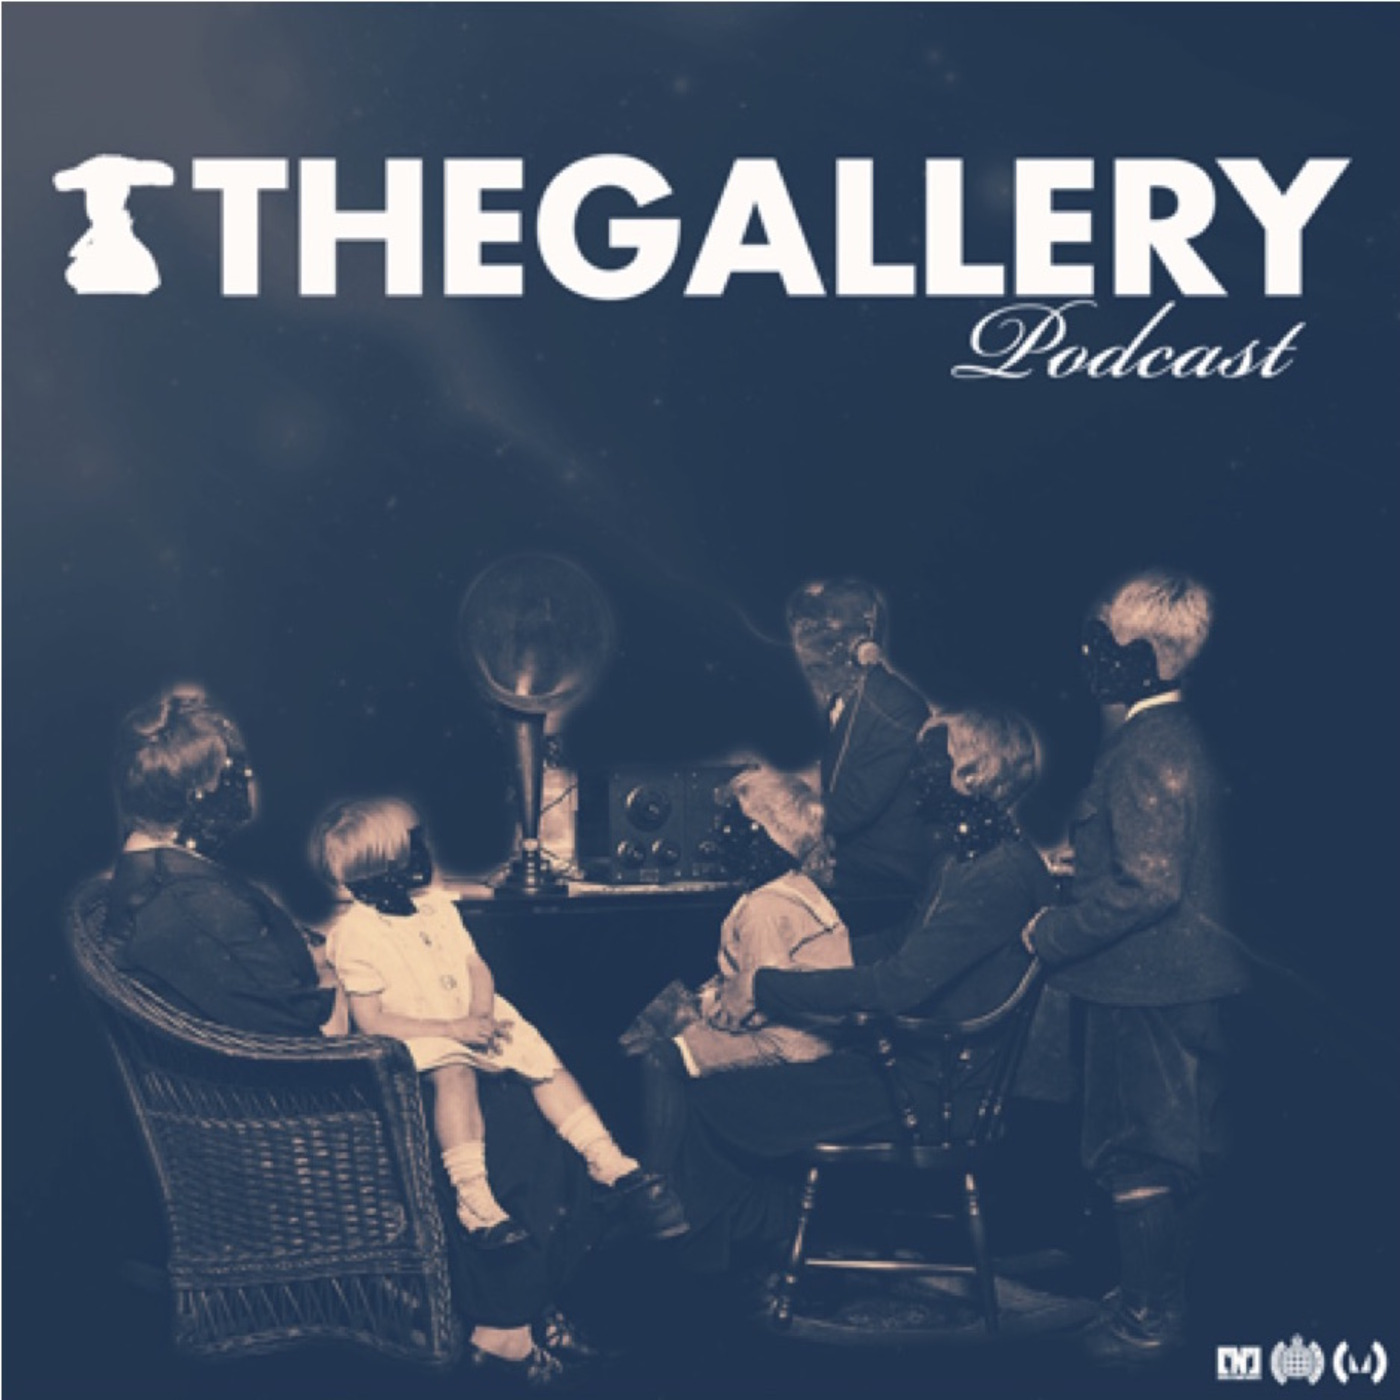 The Gallery Podcast Episode 176 W/ Tristan D + Benny Benassi Guest Mix